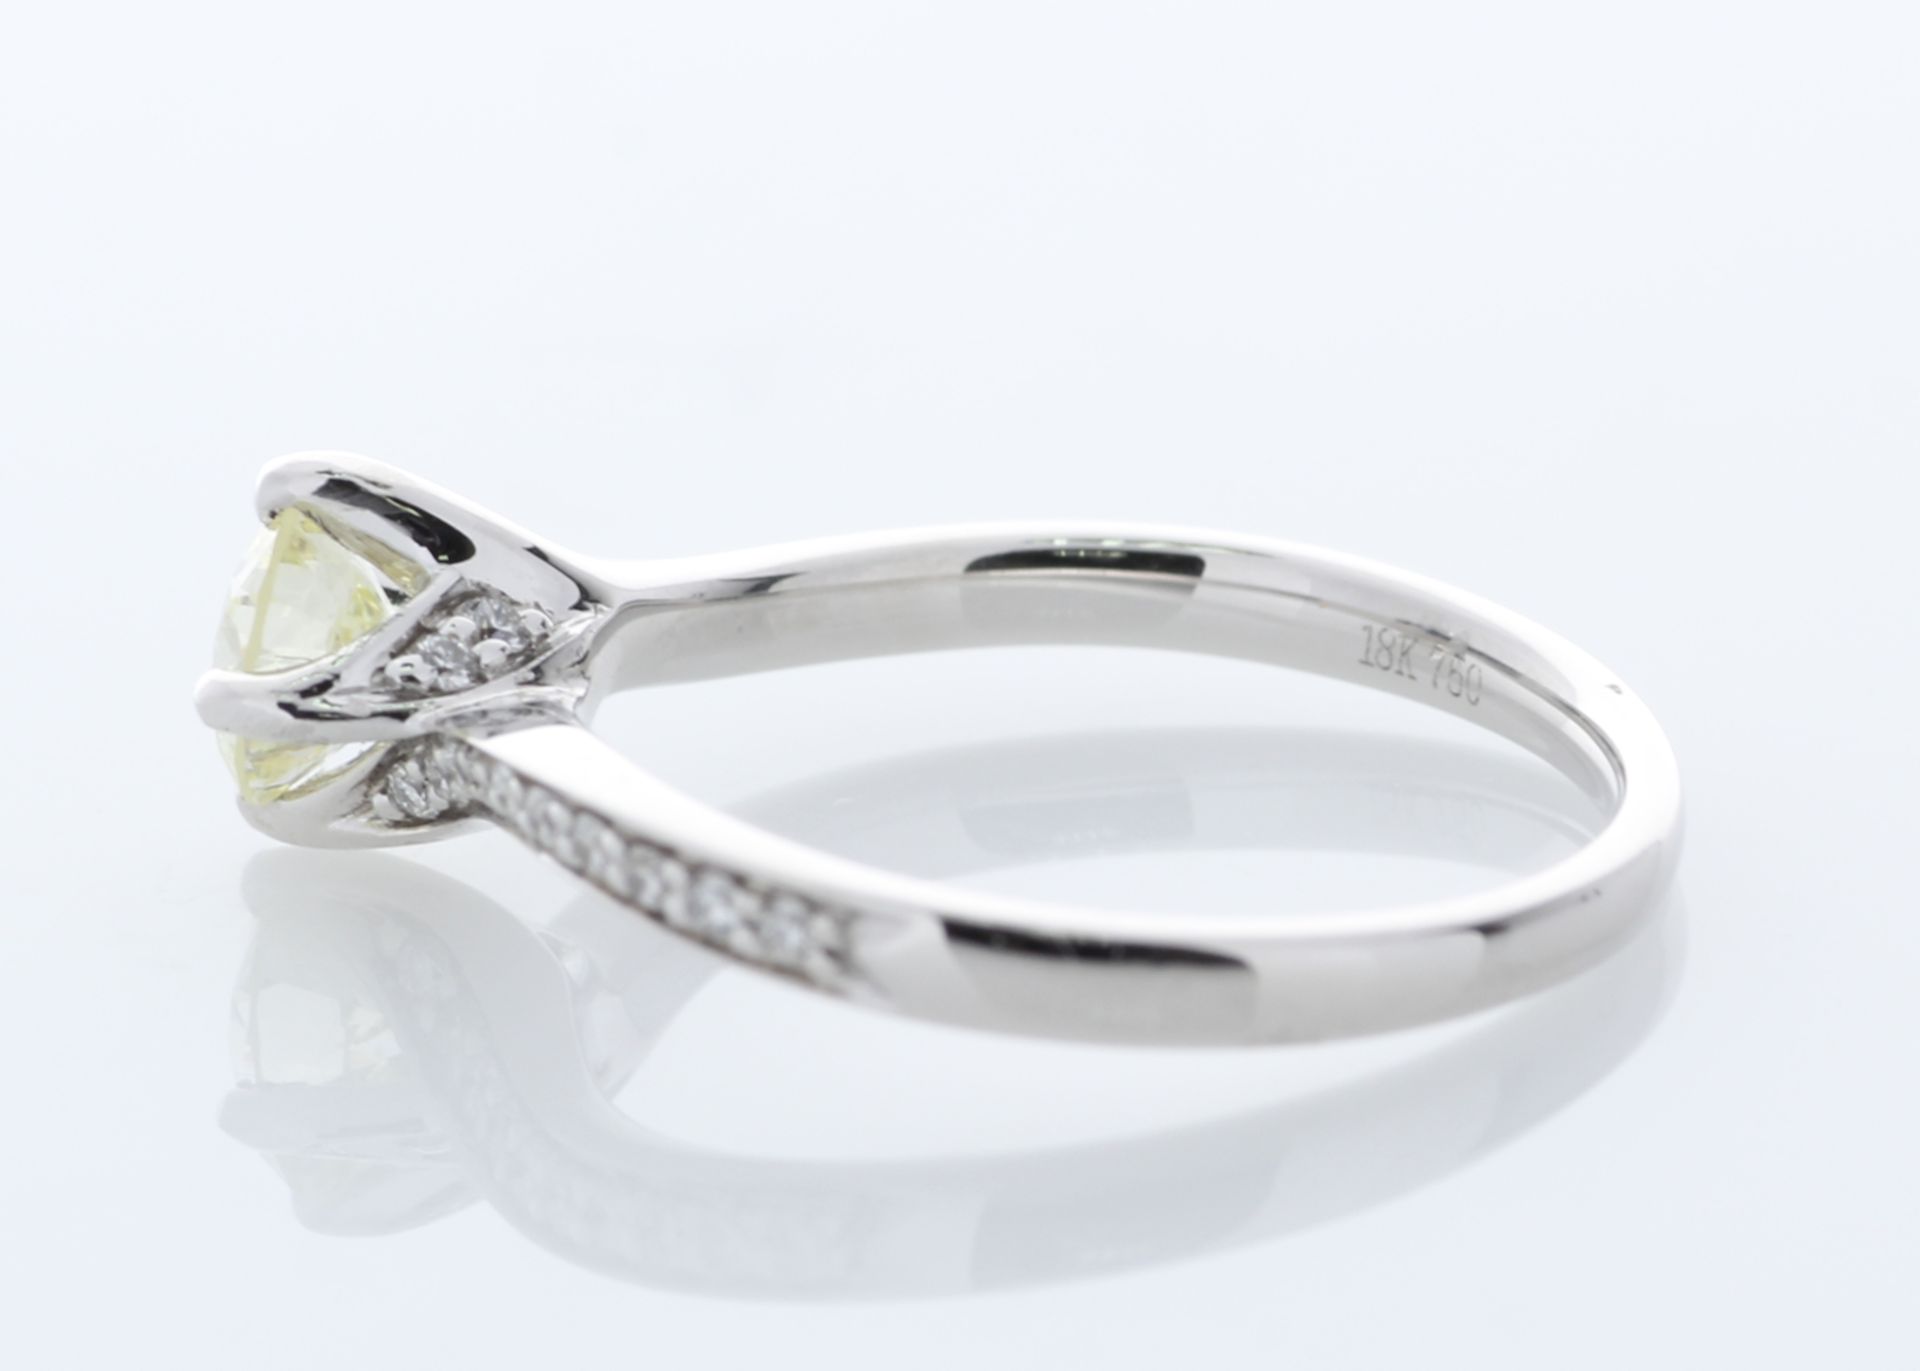 18ct White Gold Diamond Set Shoulders Ring 0.72 Carats - Valued By GIE £11,795.00 - One stunning - Image 3 of 6